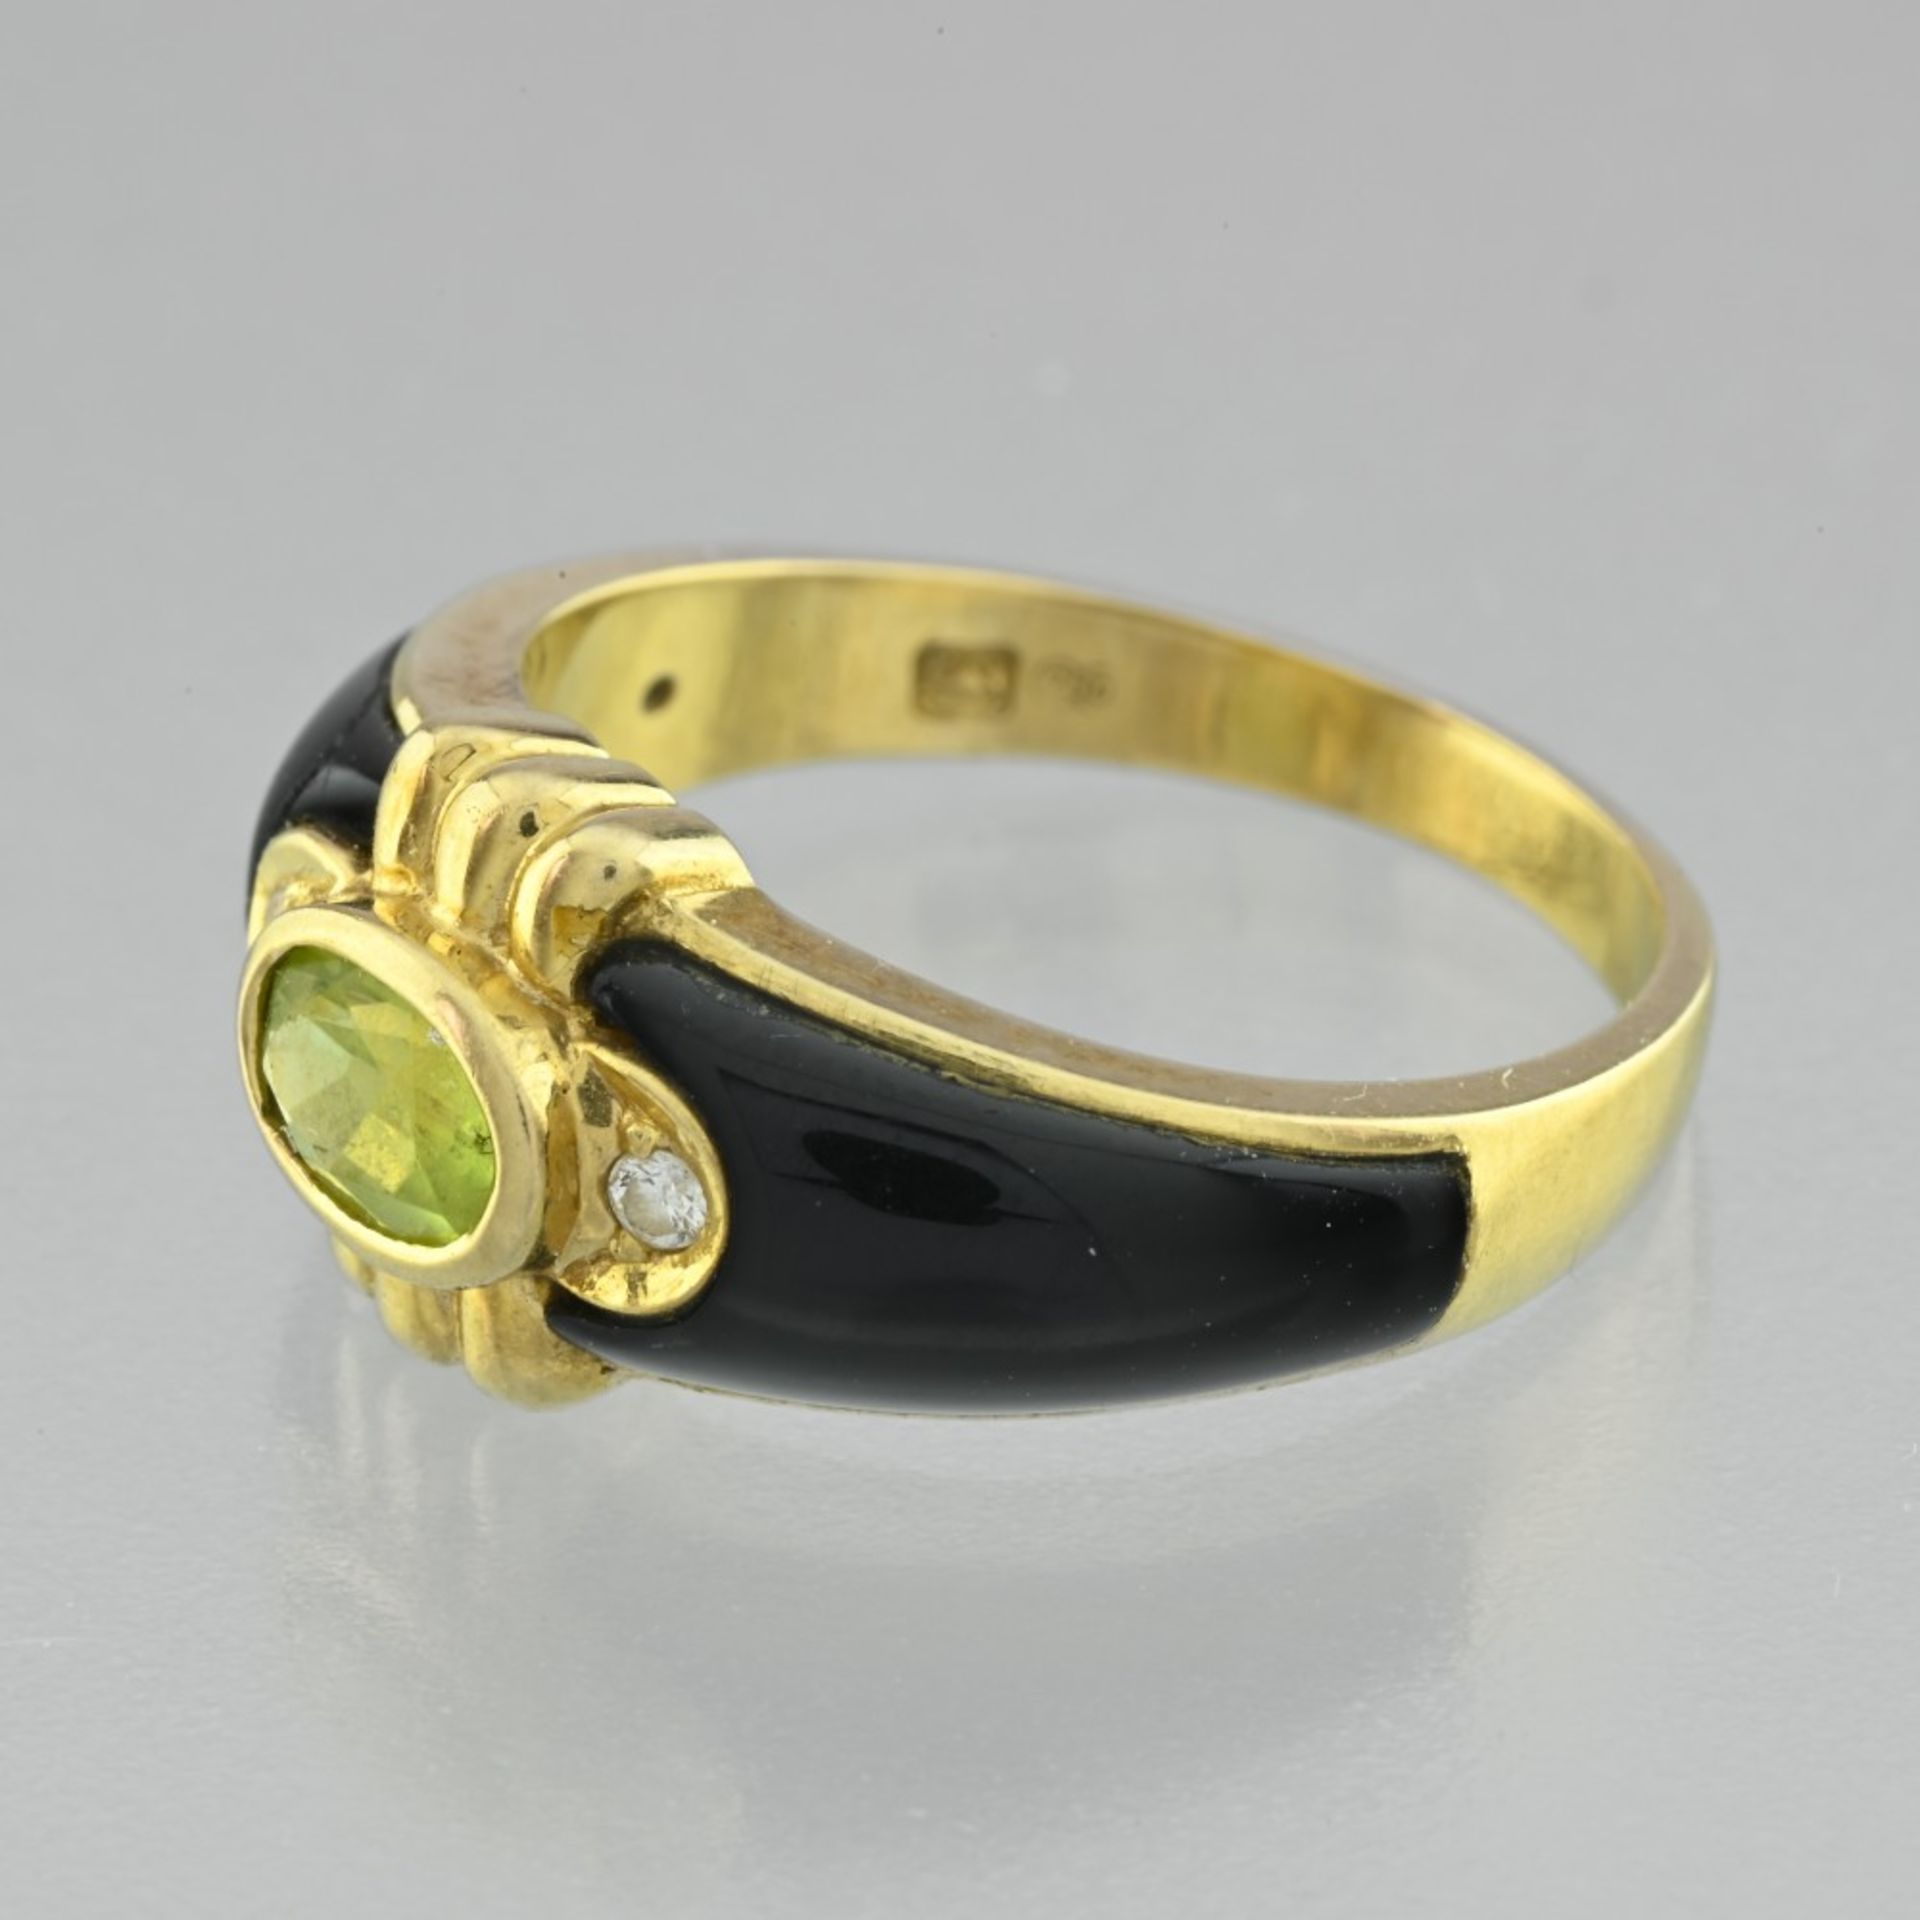 Black enamel and peridot ring In 18 Karat yellow gold, the body of the ring is covered on the - Image 2 of 2